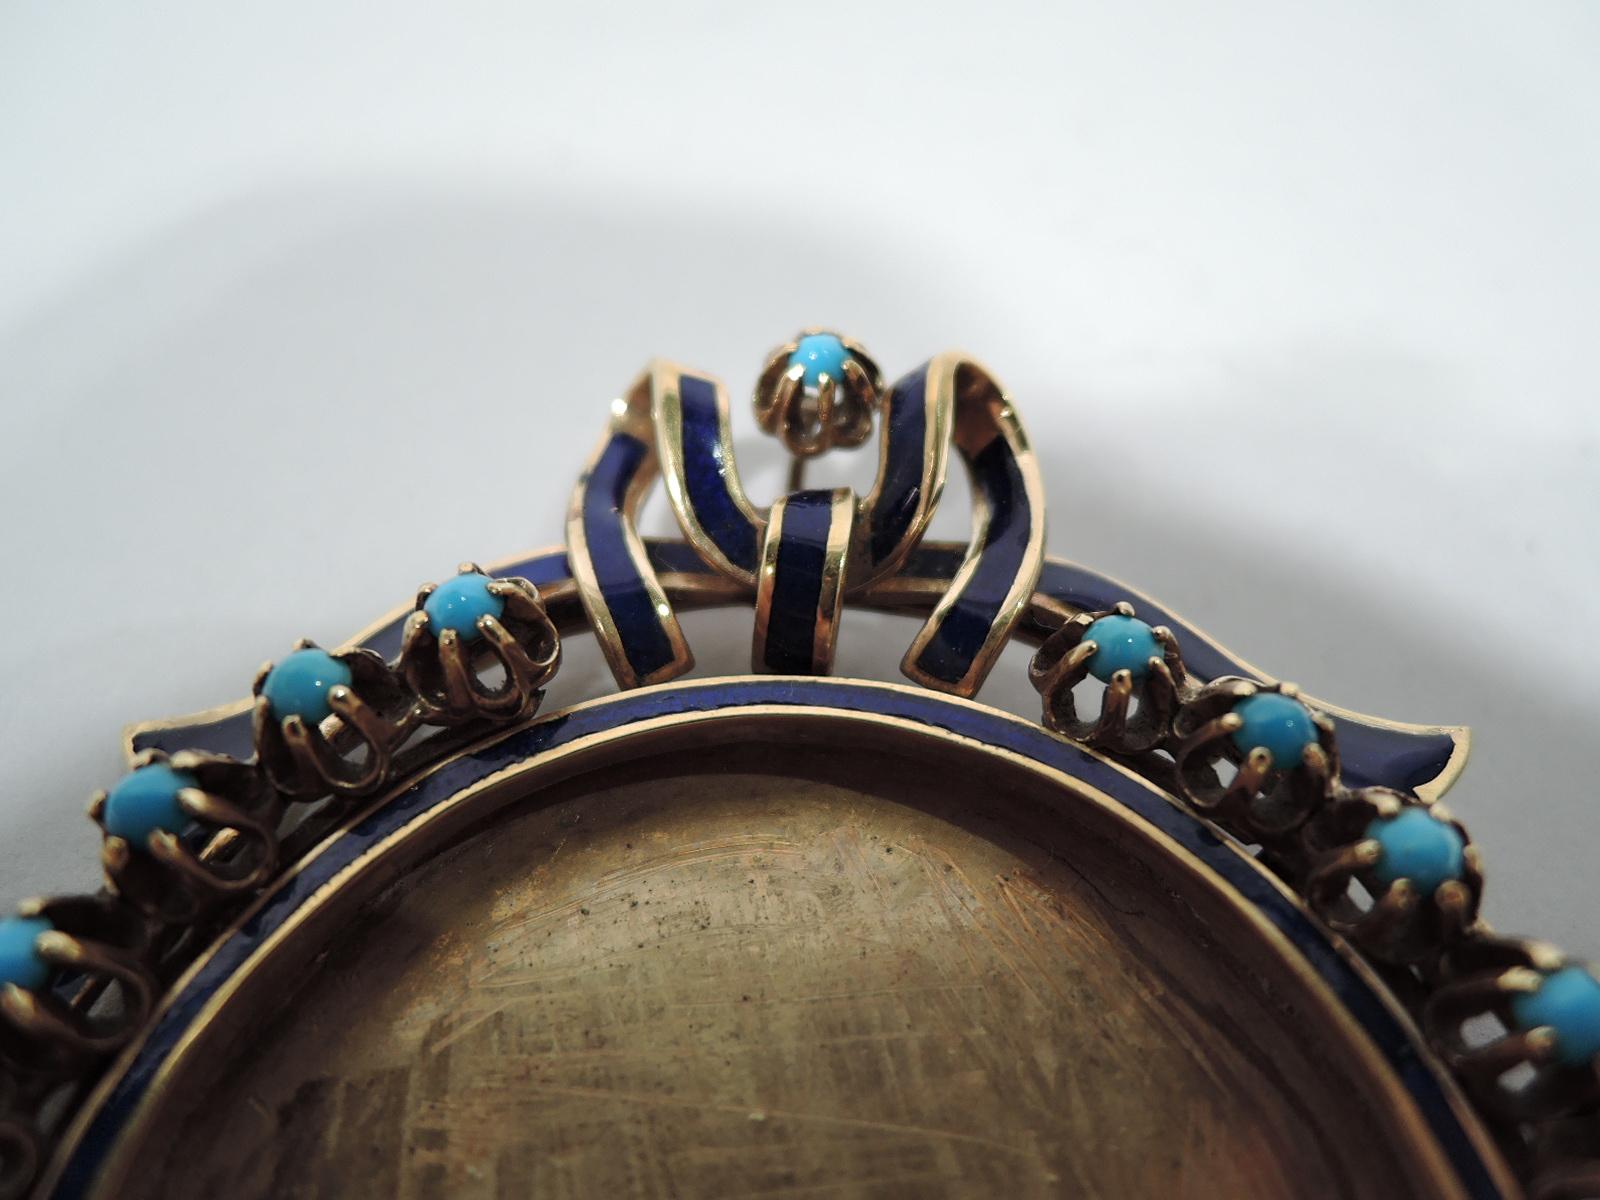 Turn-of-the-century European 18K gold picture frame. Round window bordered by blue enamel and cabochon turquoise beads. At top blue-enamel ribbon crown and at bottom stylized lozenge. Hinged ring support with scrolling leaf mount. Marked.